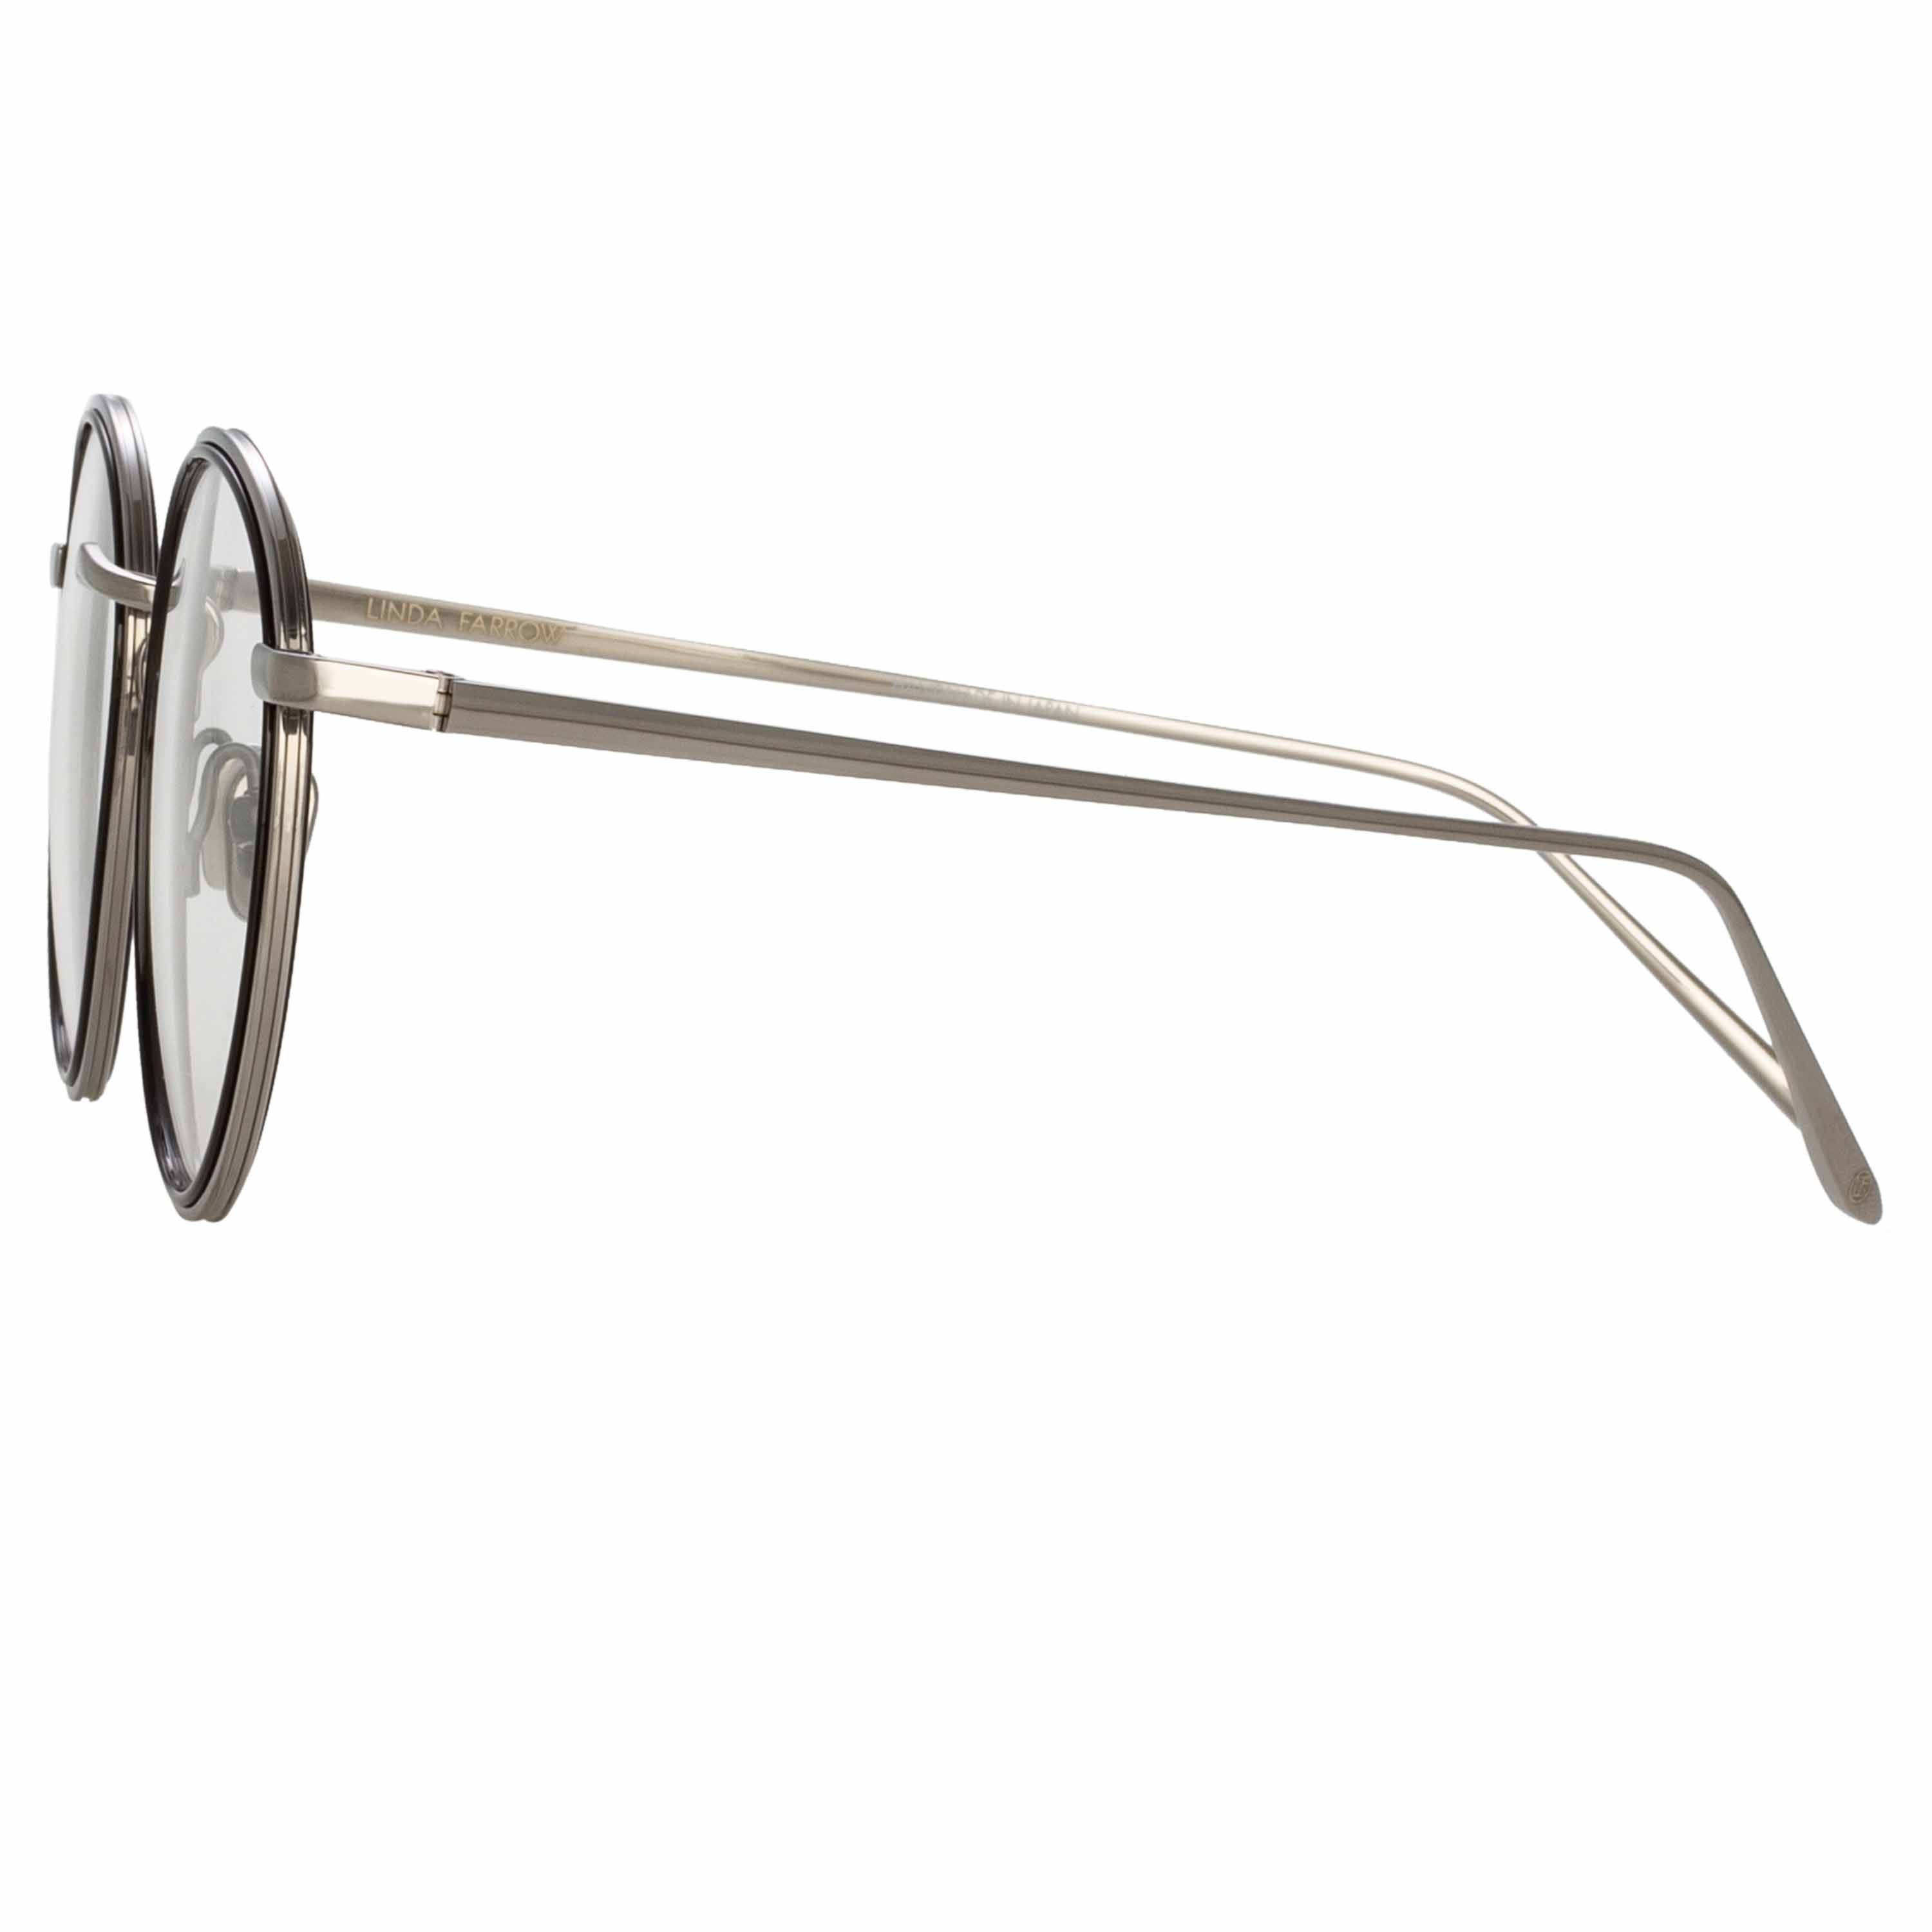 COMER OPTICAL OVAL FRAME IN WHITE GOLD - 4